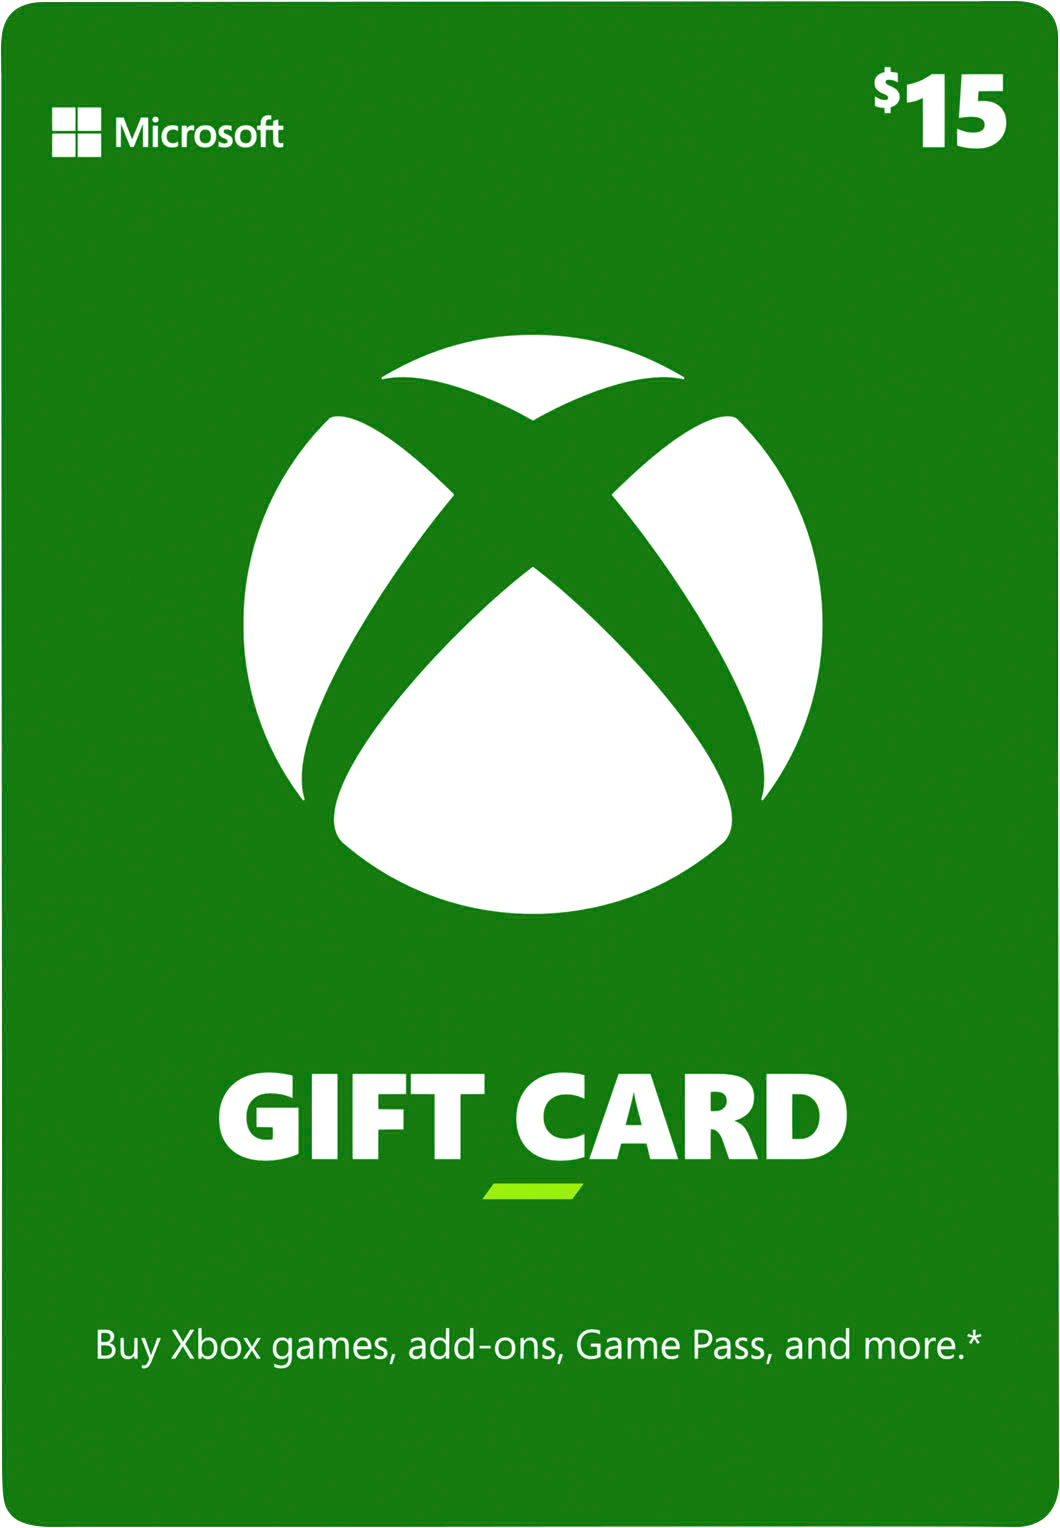 can you buy v bucks with a microsoft gift card